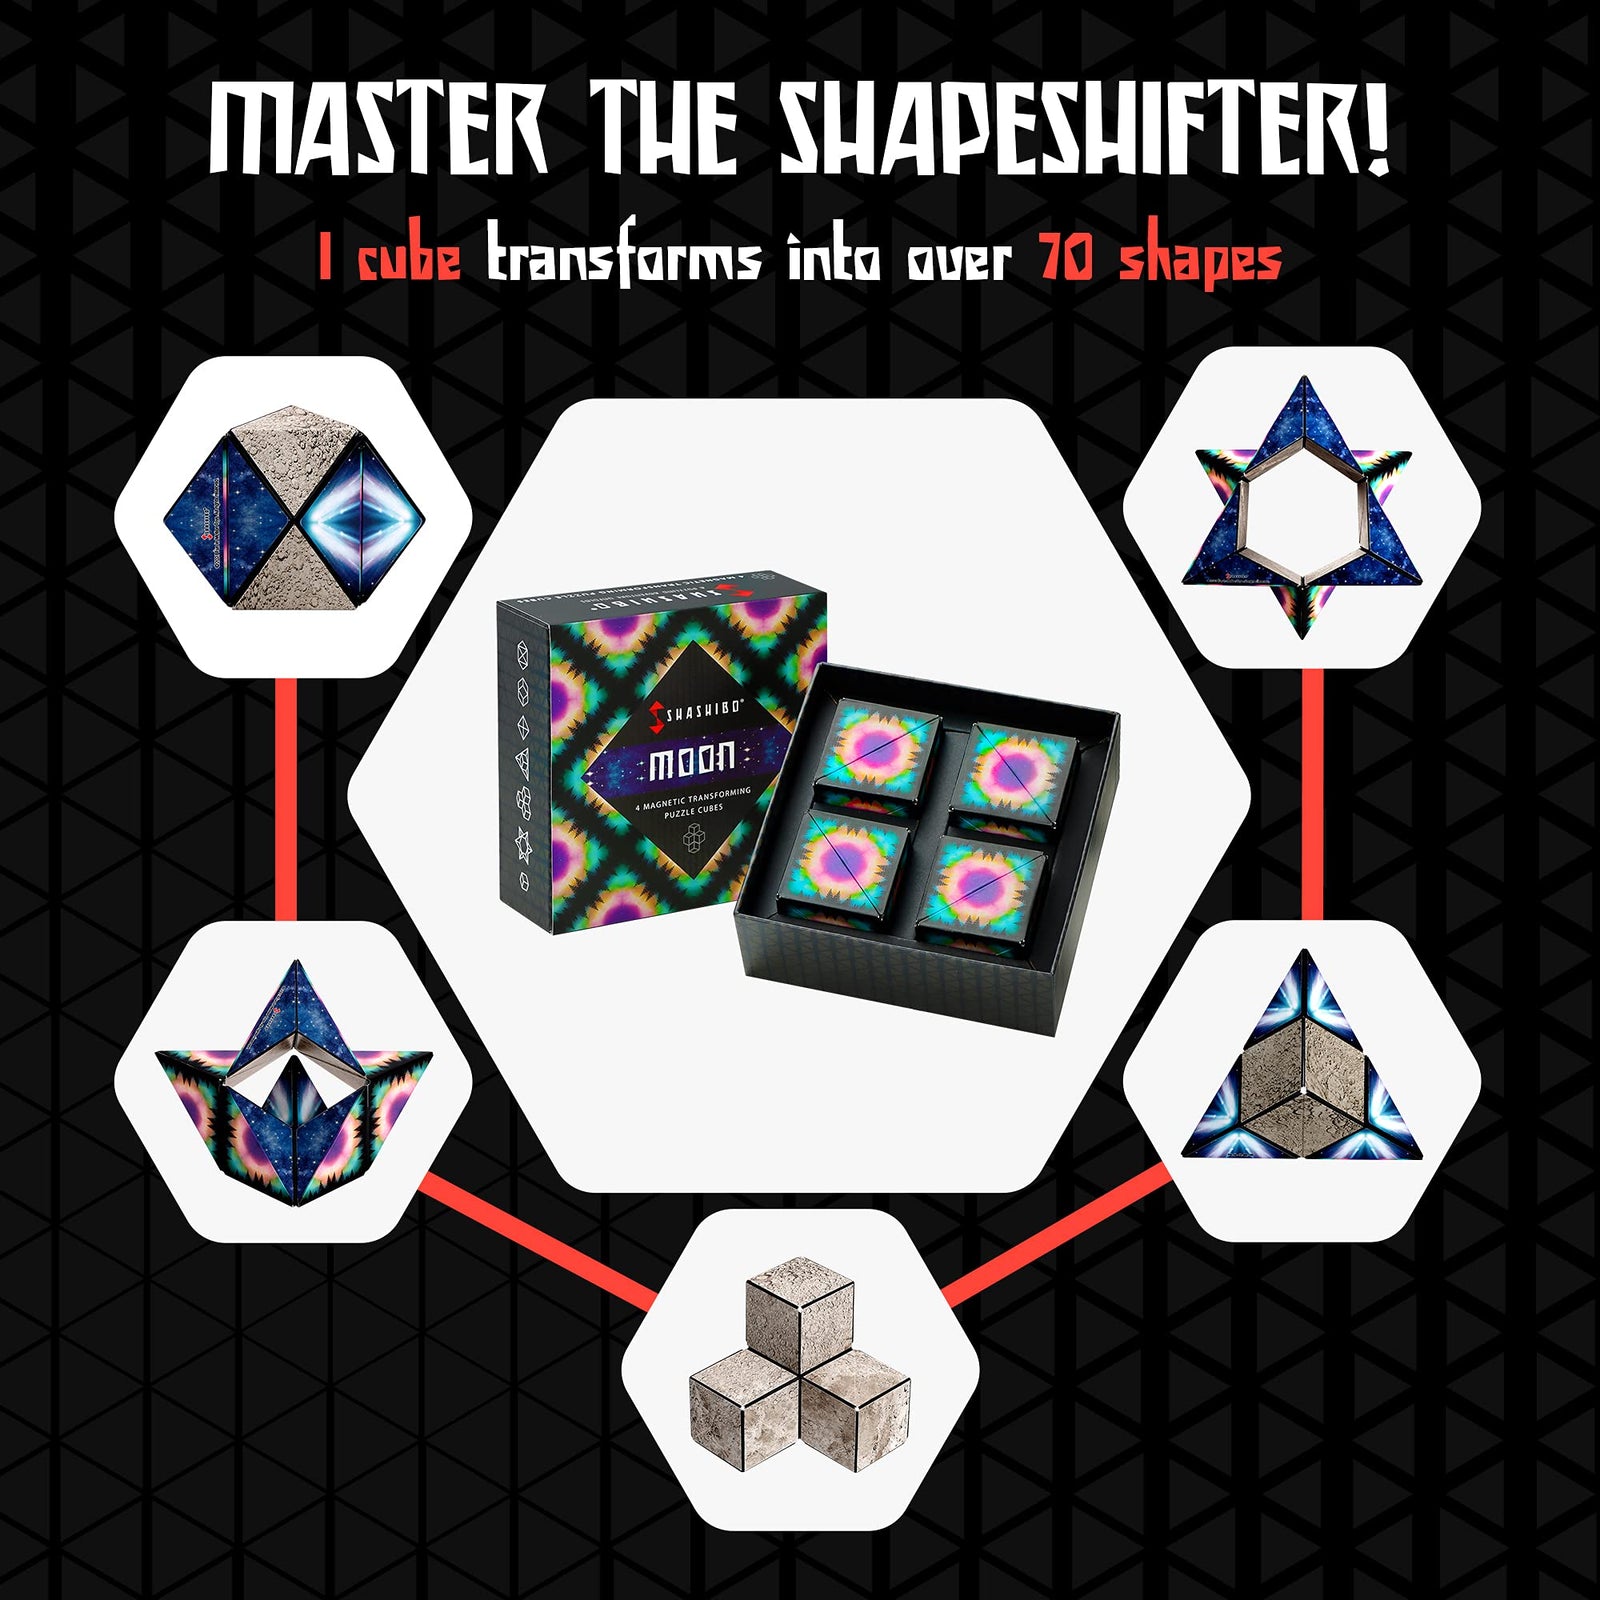 SHASHIBO Shape Shifting Box - Award-Winning, Patented Fidget Cube w/ 36 Rare Earth Magnets - Extraordinary 3D Magic Cube – Shashibo Cube Magnet Fidget Toy Transforms Into Over 70 Shapes (Spaced Out)